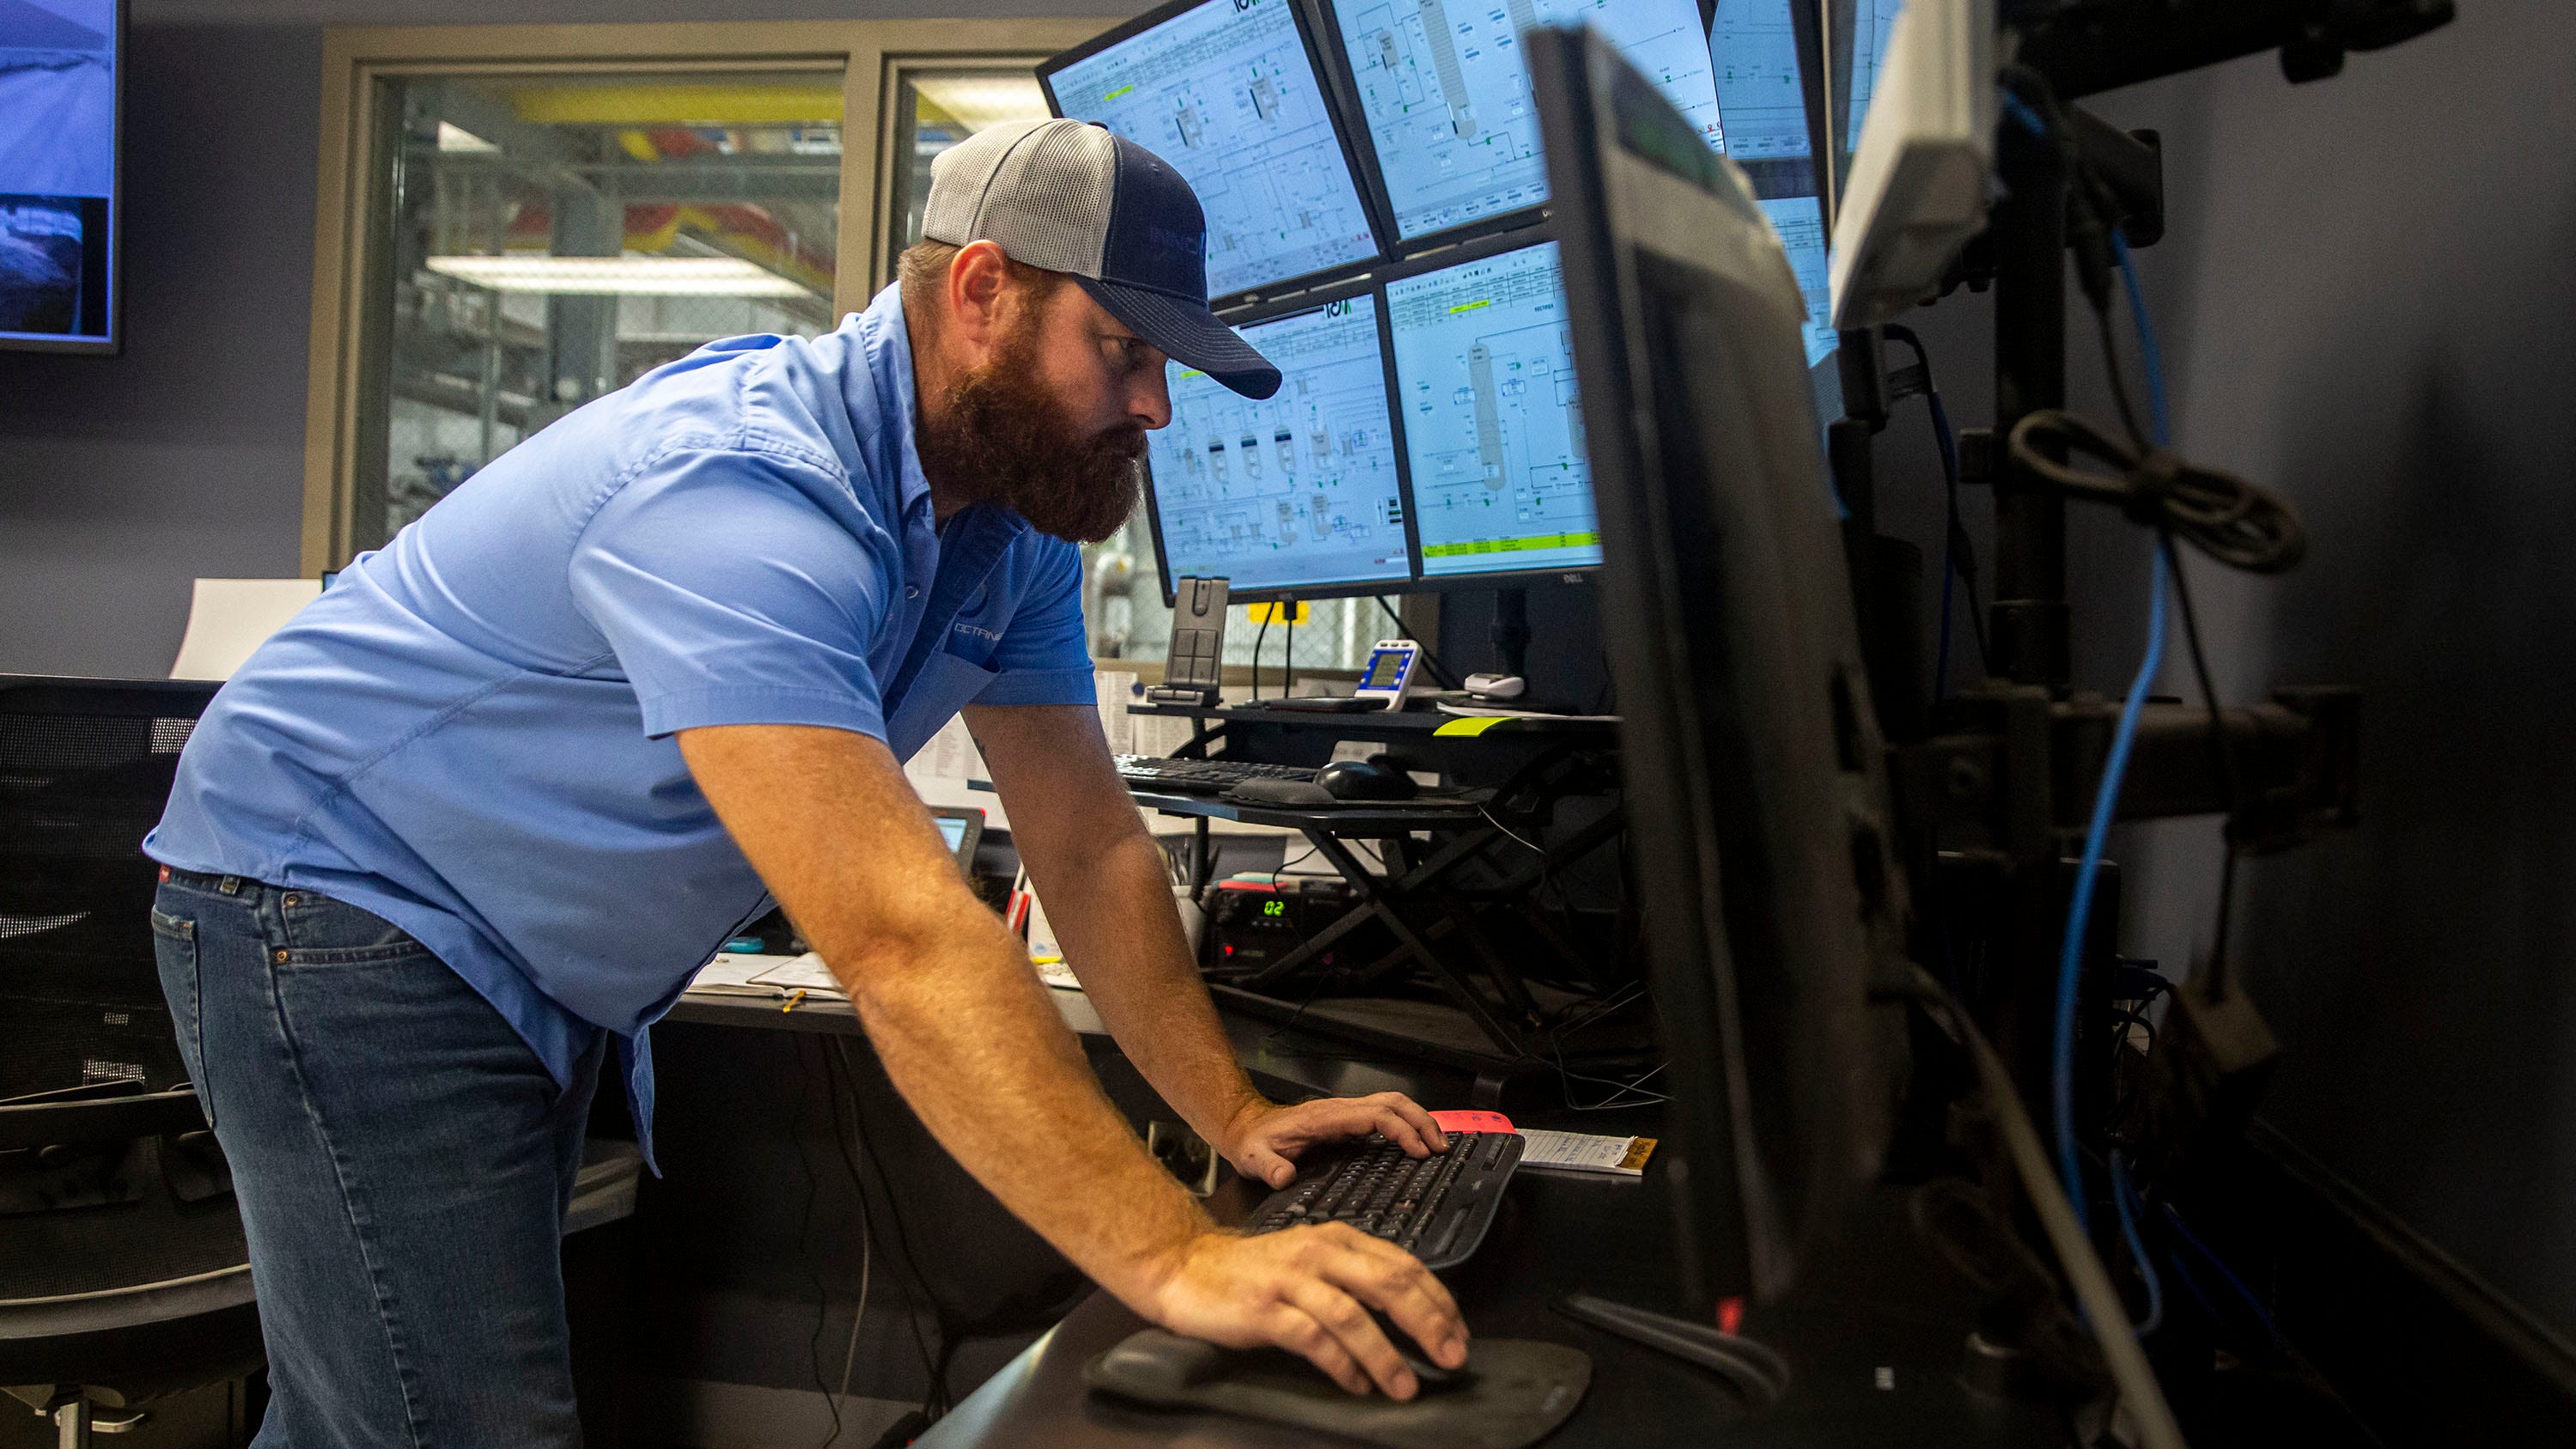 Ryan Kuhns, a shift leader at Elite Octane, a 200 million-gallon ethanol plant in western Iowa, keeps an eye on the plant's operations.